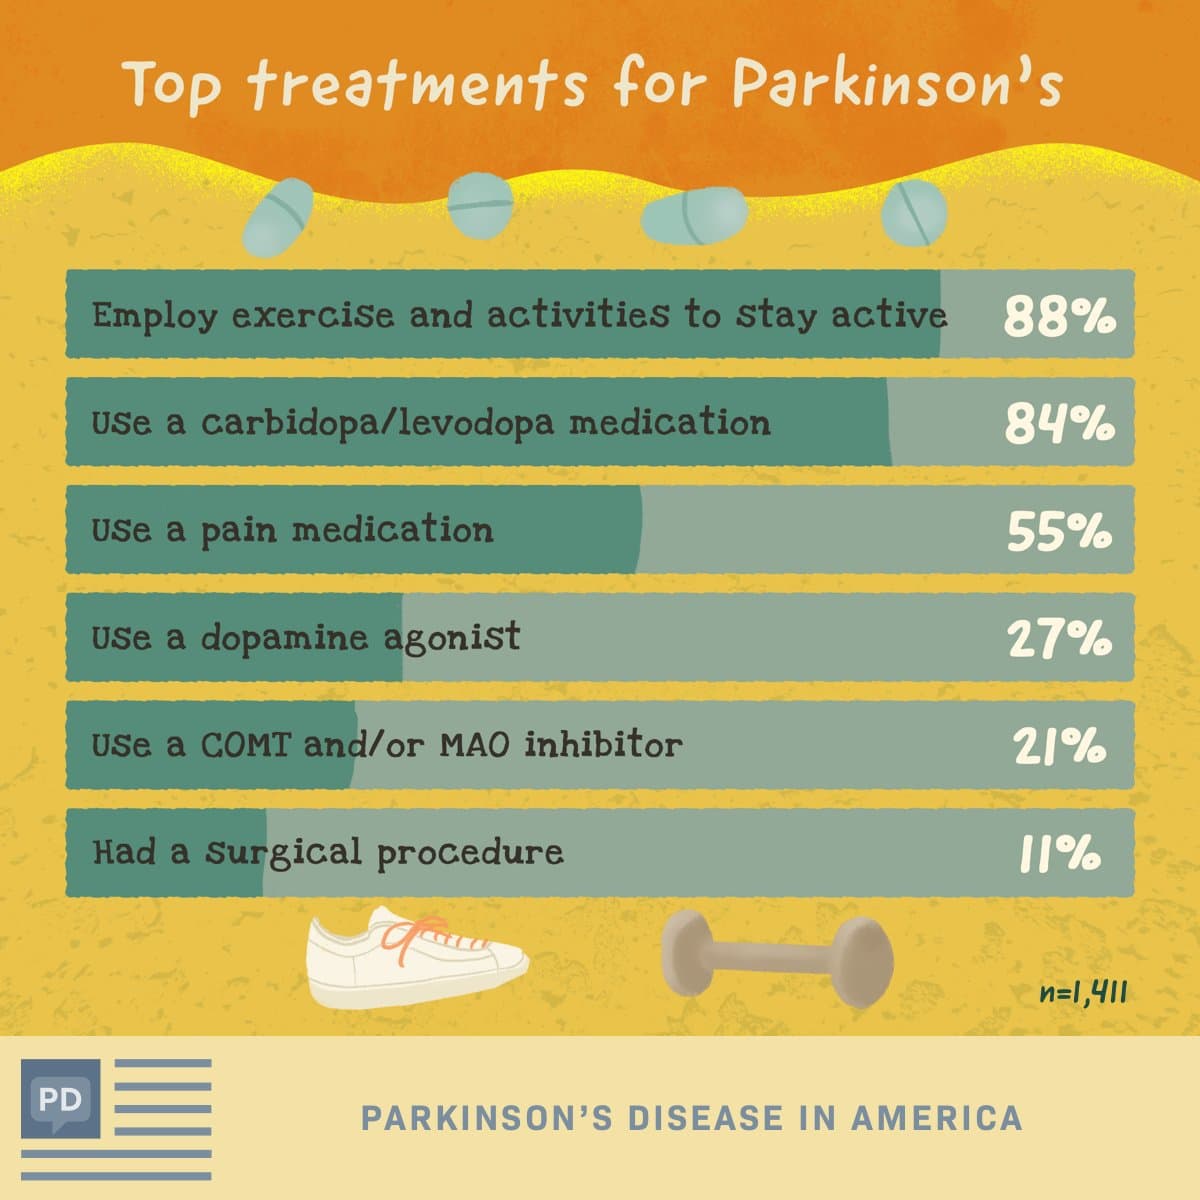 Is There Any Cure For Parkinson